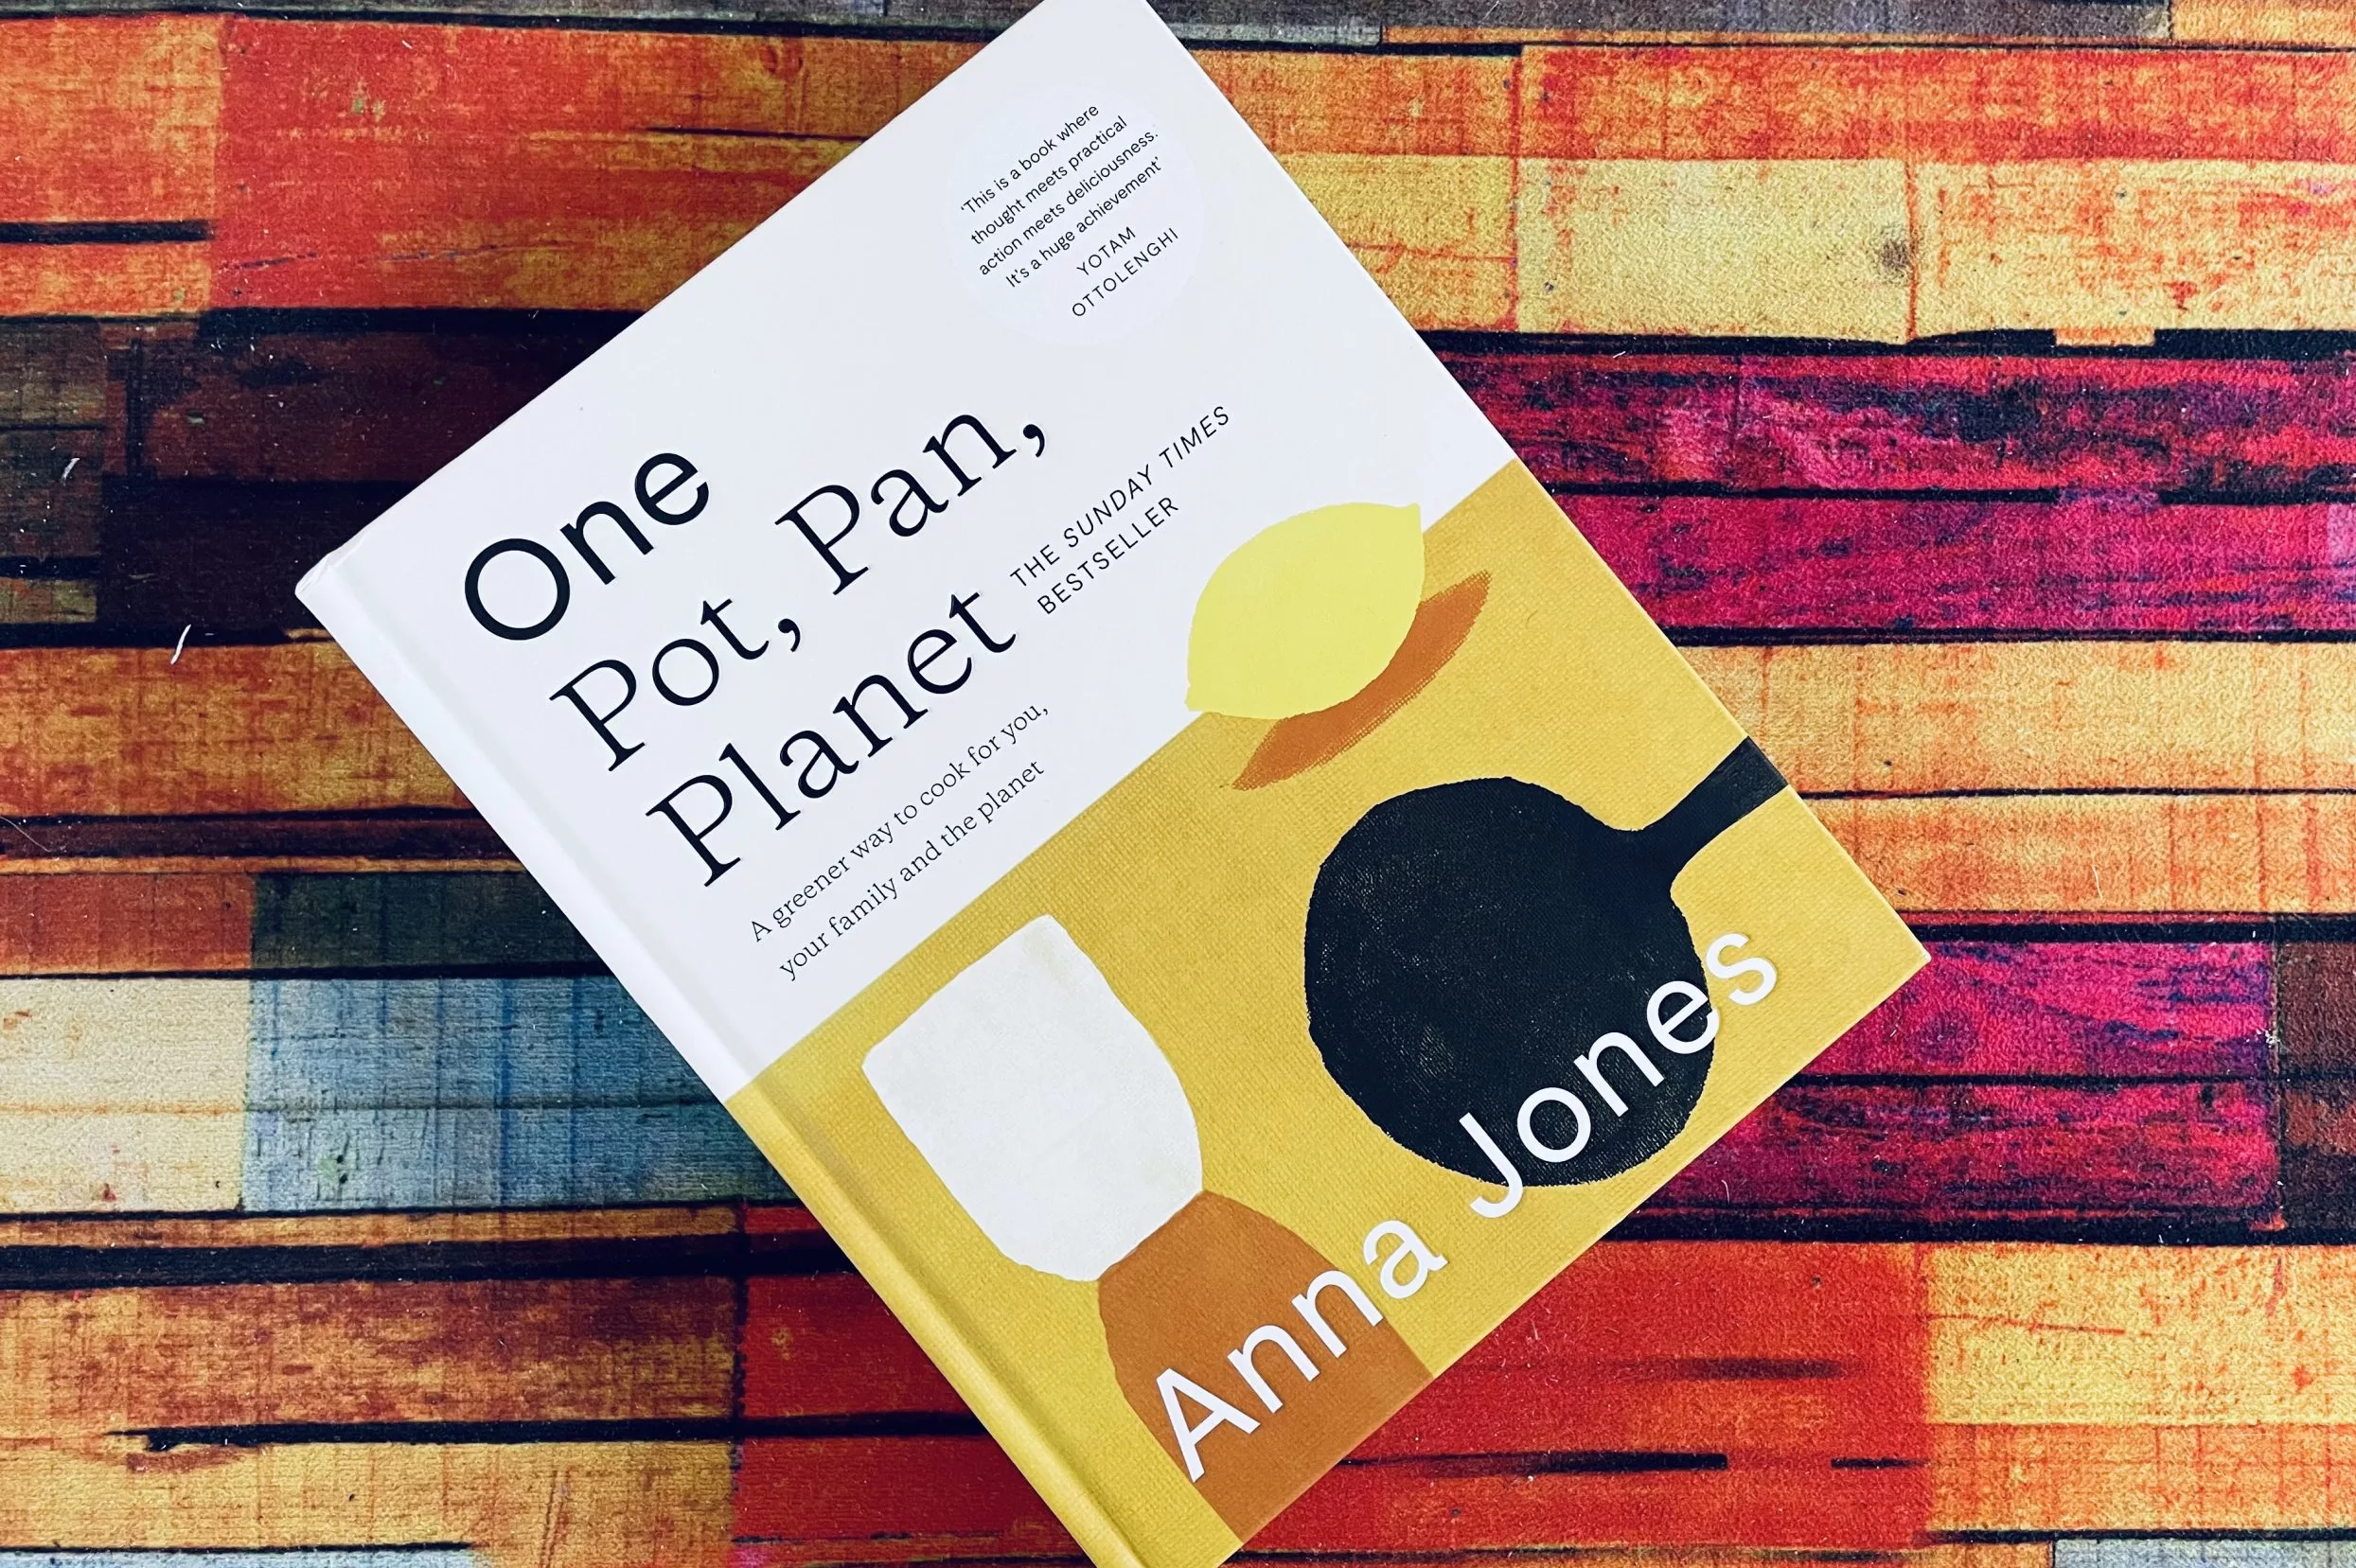 Cookbook Preview: One: Pot, Pan, Planet: A Greener Way to Cook for